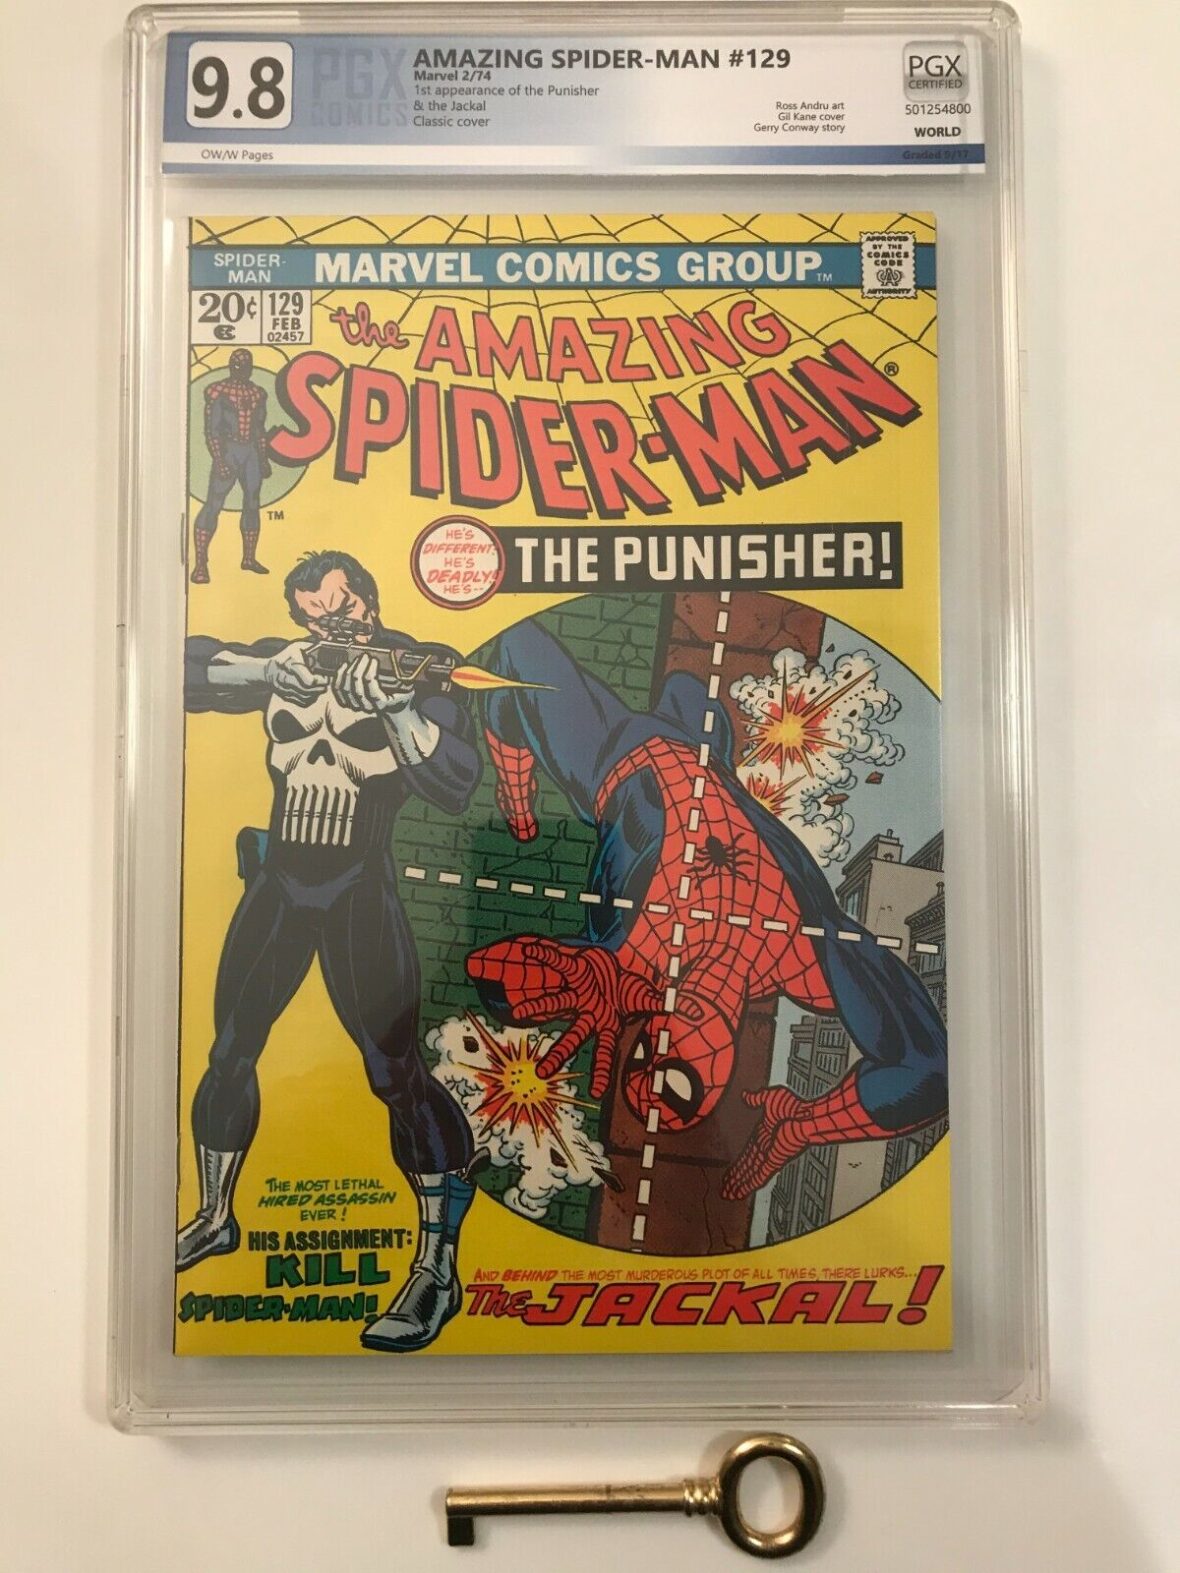 most valuable spider man memorabilia: first the punisher book